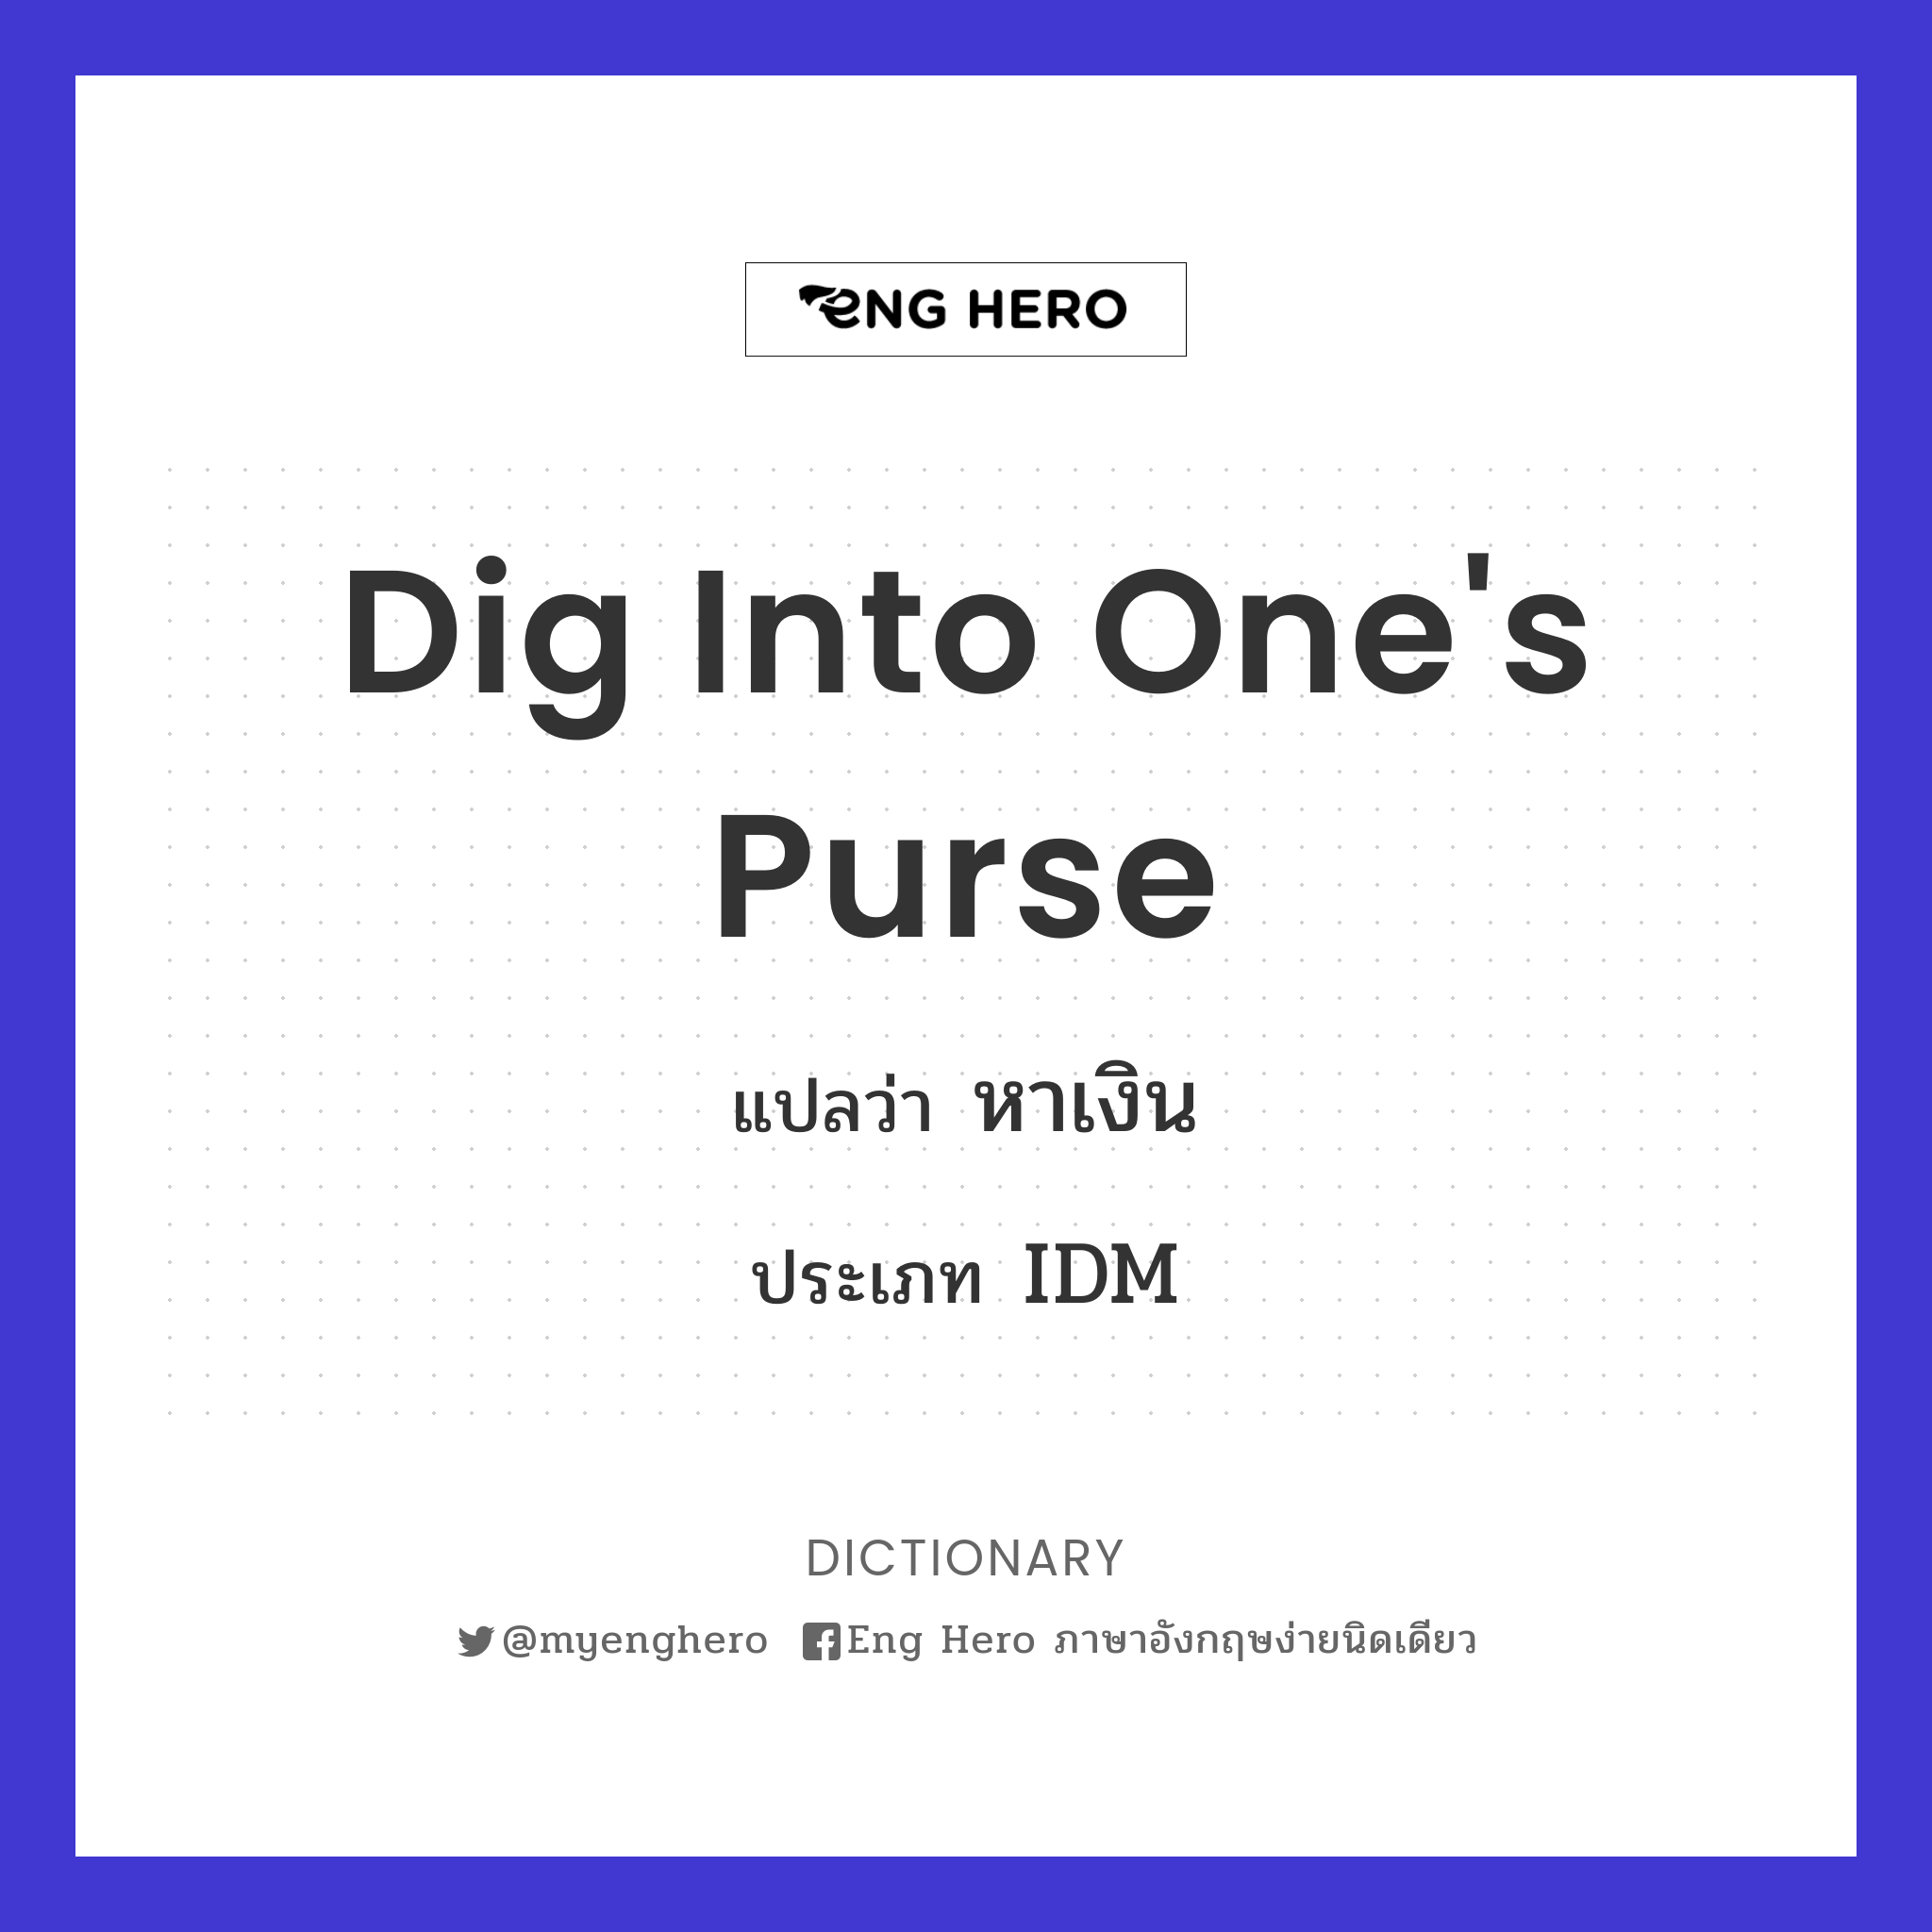 dig into one's purse